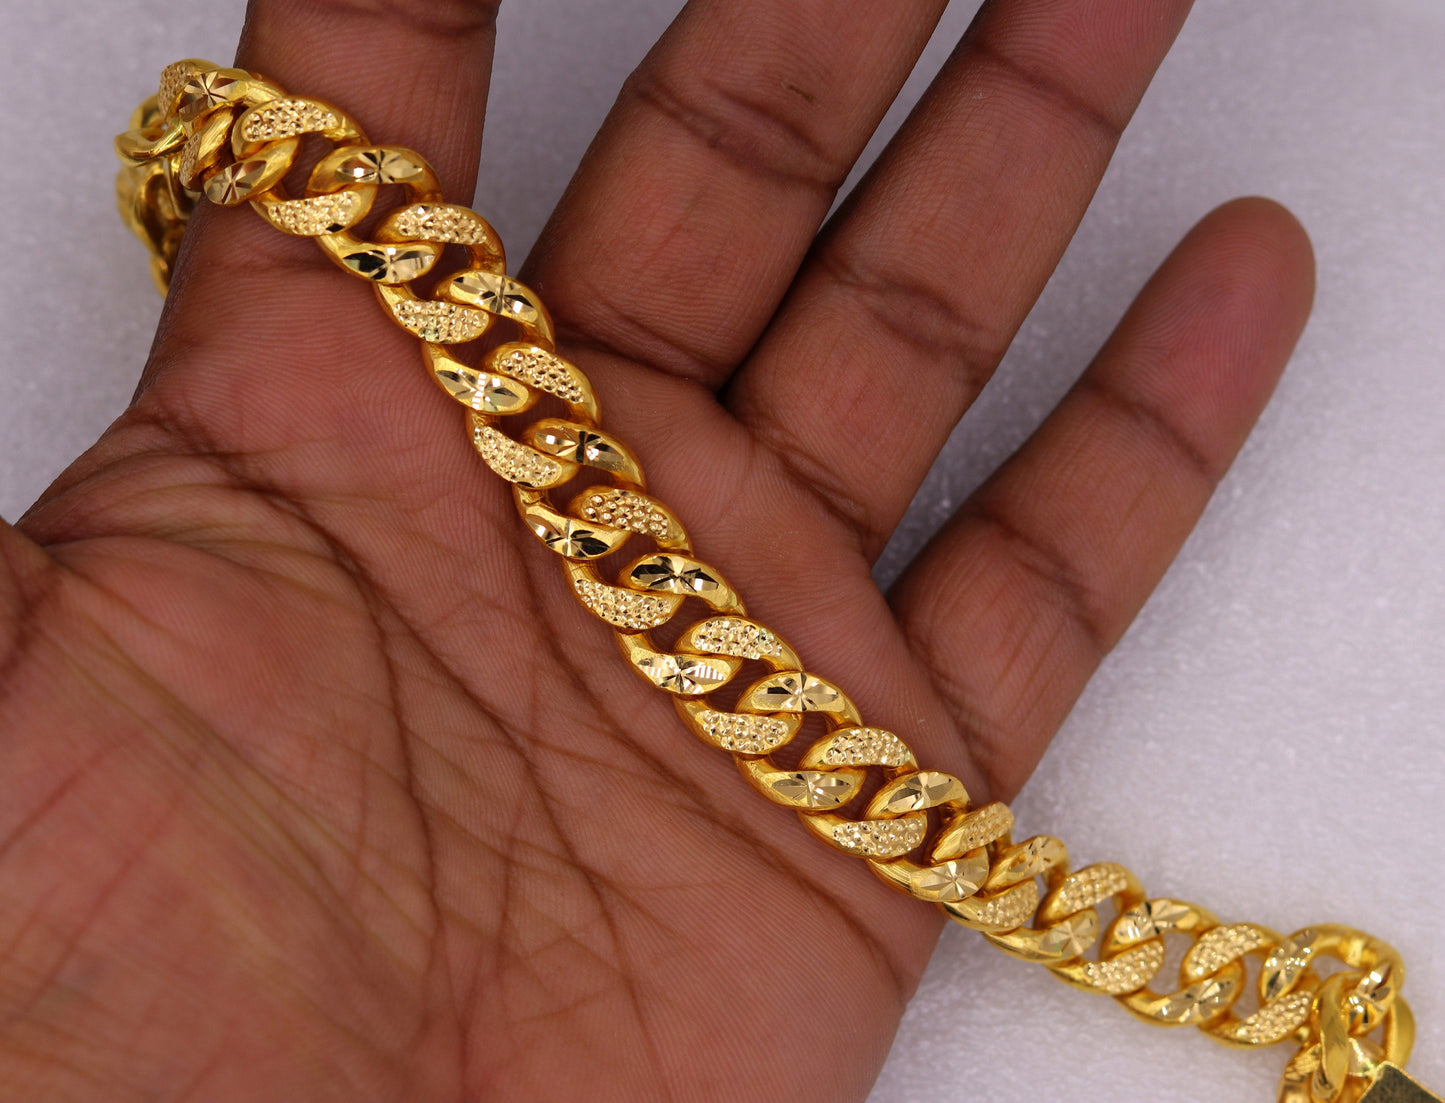 22k yellow gold solid link chain bracelet with fabulous diamond cut design unique locking system men's heavy bracelet gifting jewelry - TRIBAL ORNAMENTS